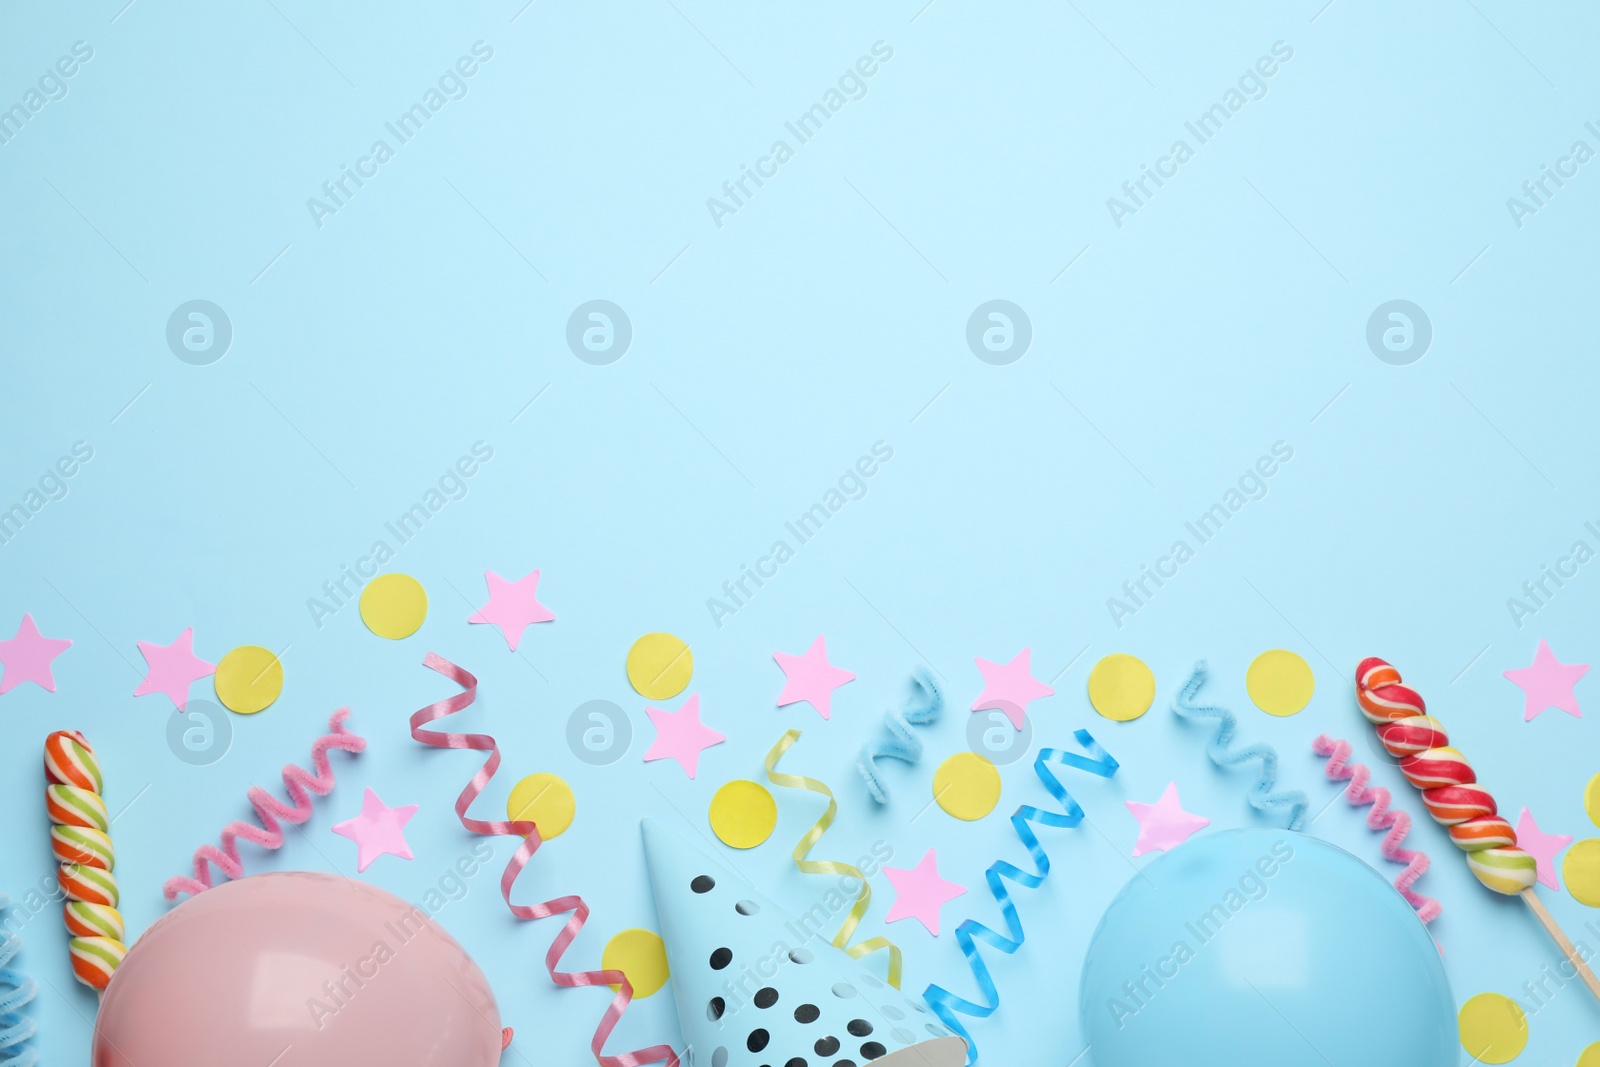 Photo of Flat lay composition with serpentine streamers and party accessories on light blue background, space for text. Birthday surprise